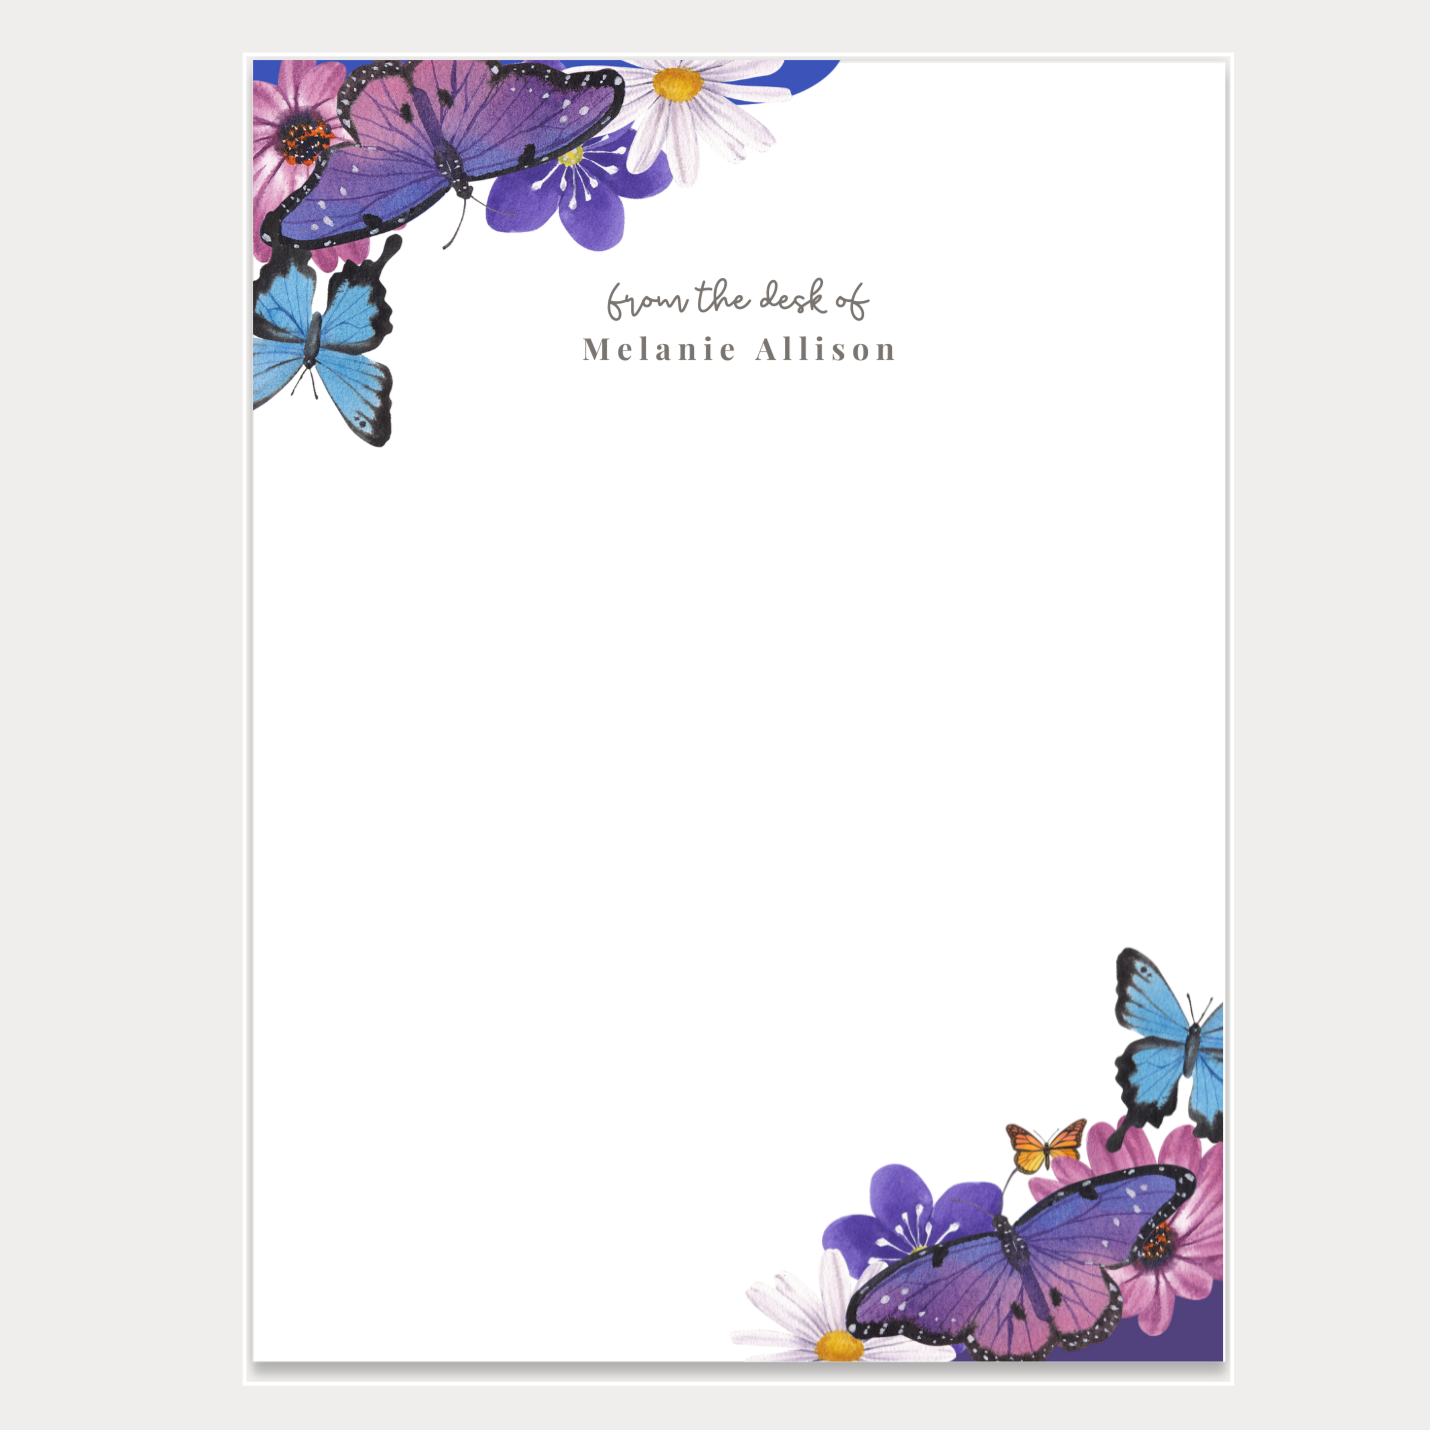 Personalized notepads with a minimalist butterfly design. Notepads are available in two sizes with 48 pages per notepad. Wrapped in cellophane gift wrap - ready to be gifted! Great for teachers, boss, friend, or anyone (really)!